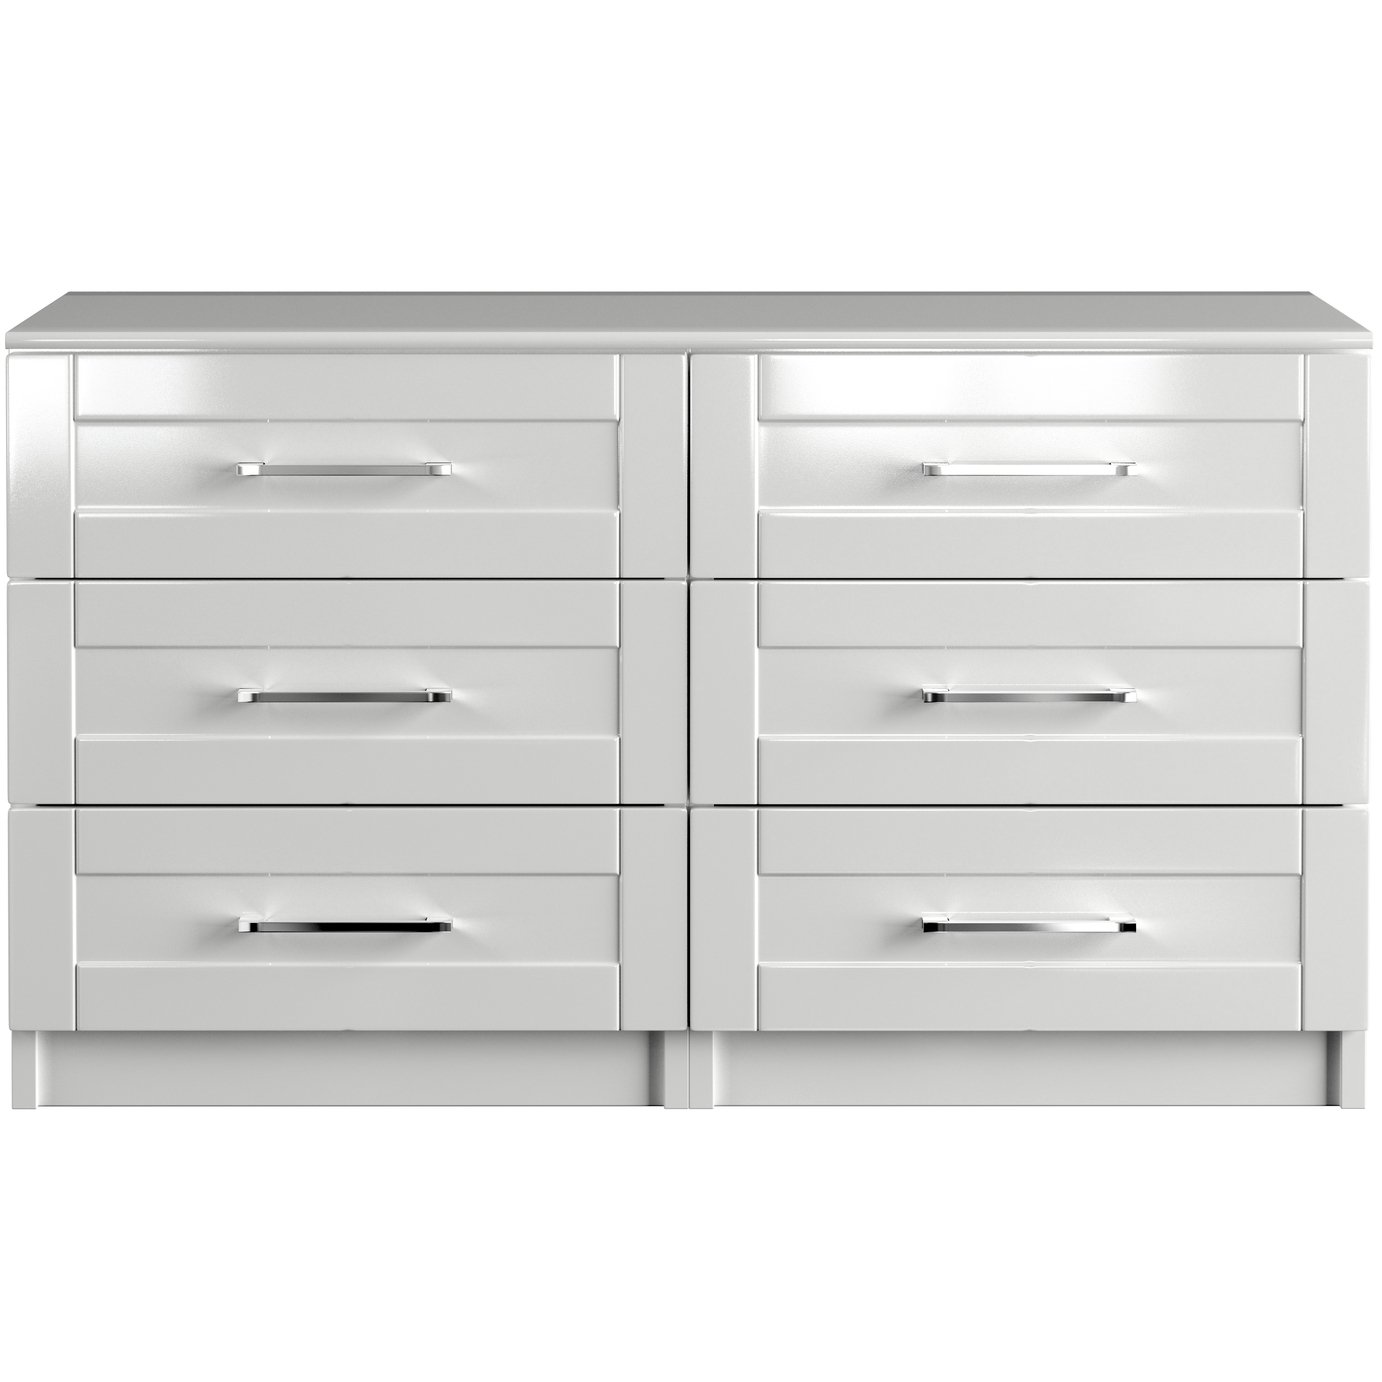 One Call Colby Gloss 3 3 Drawer Chest of Drawers - White